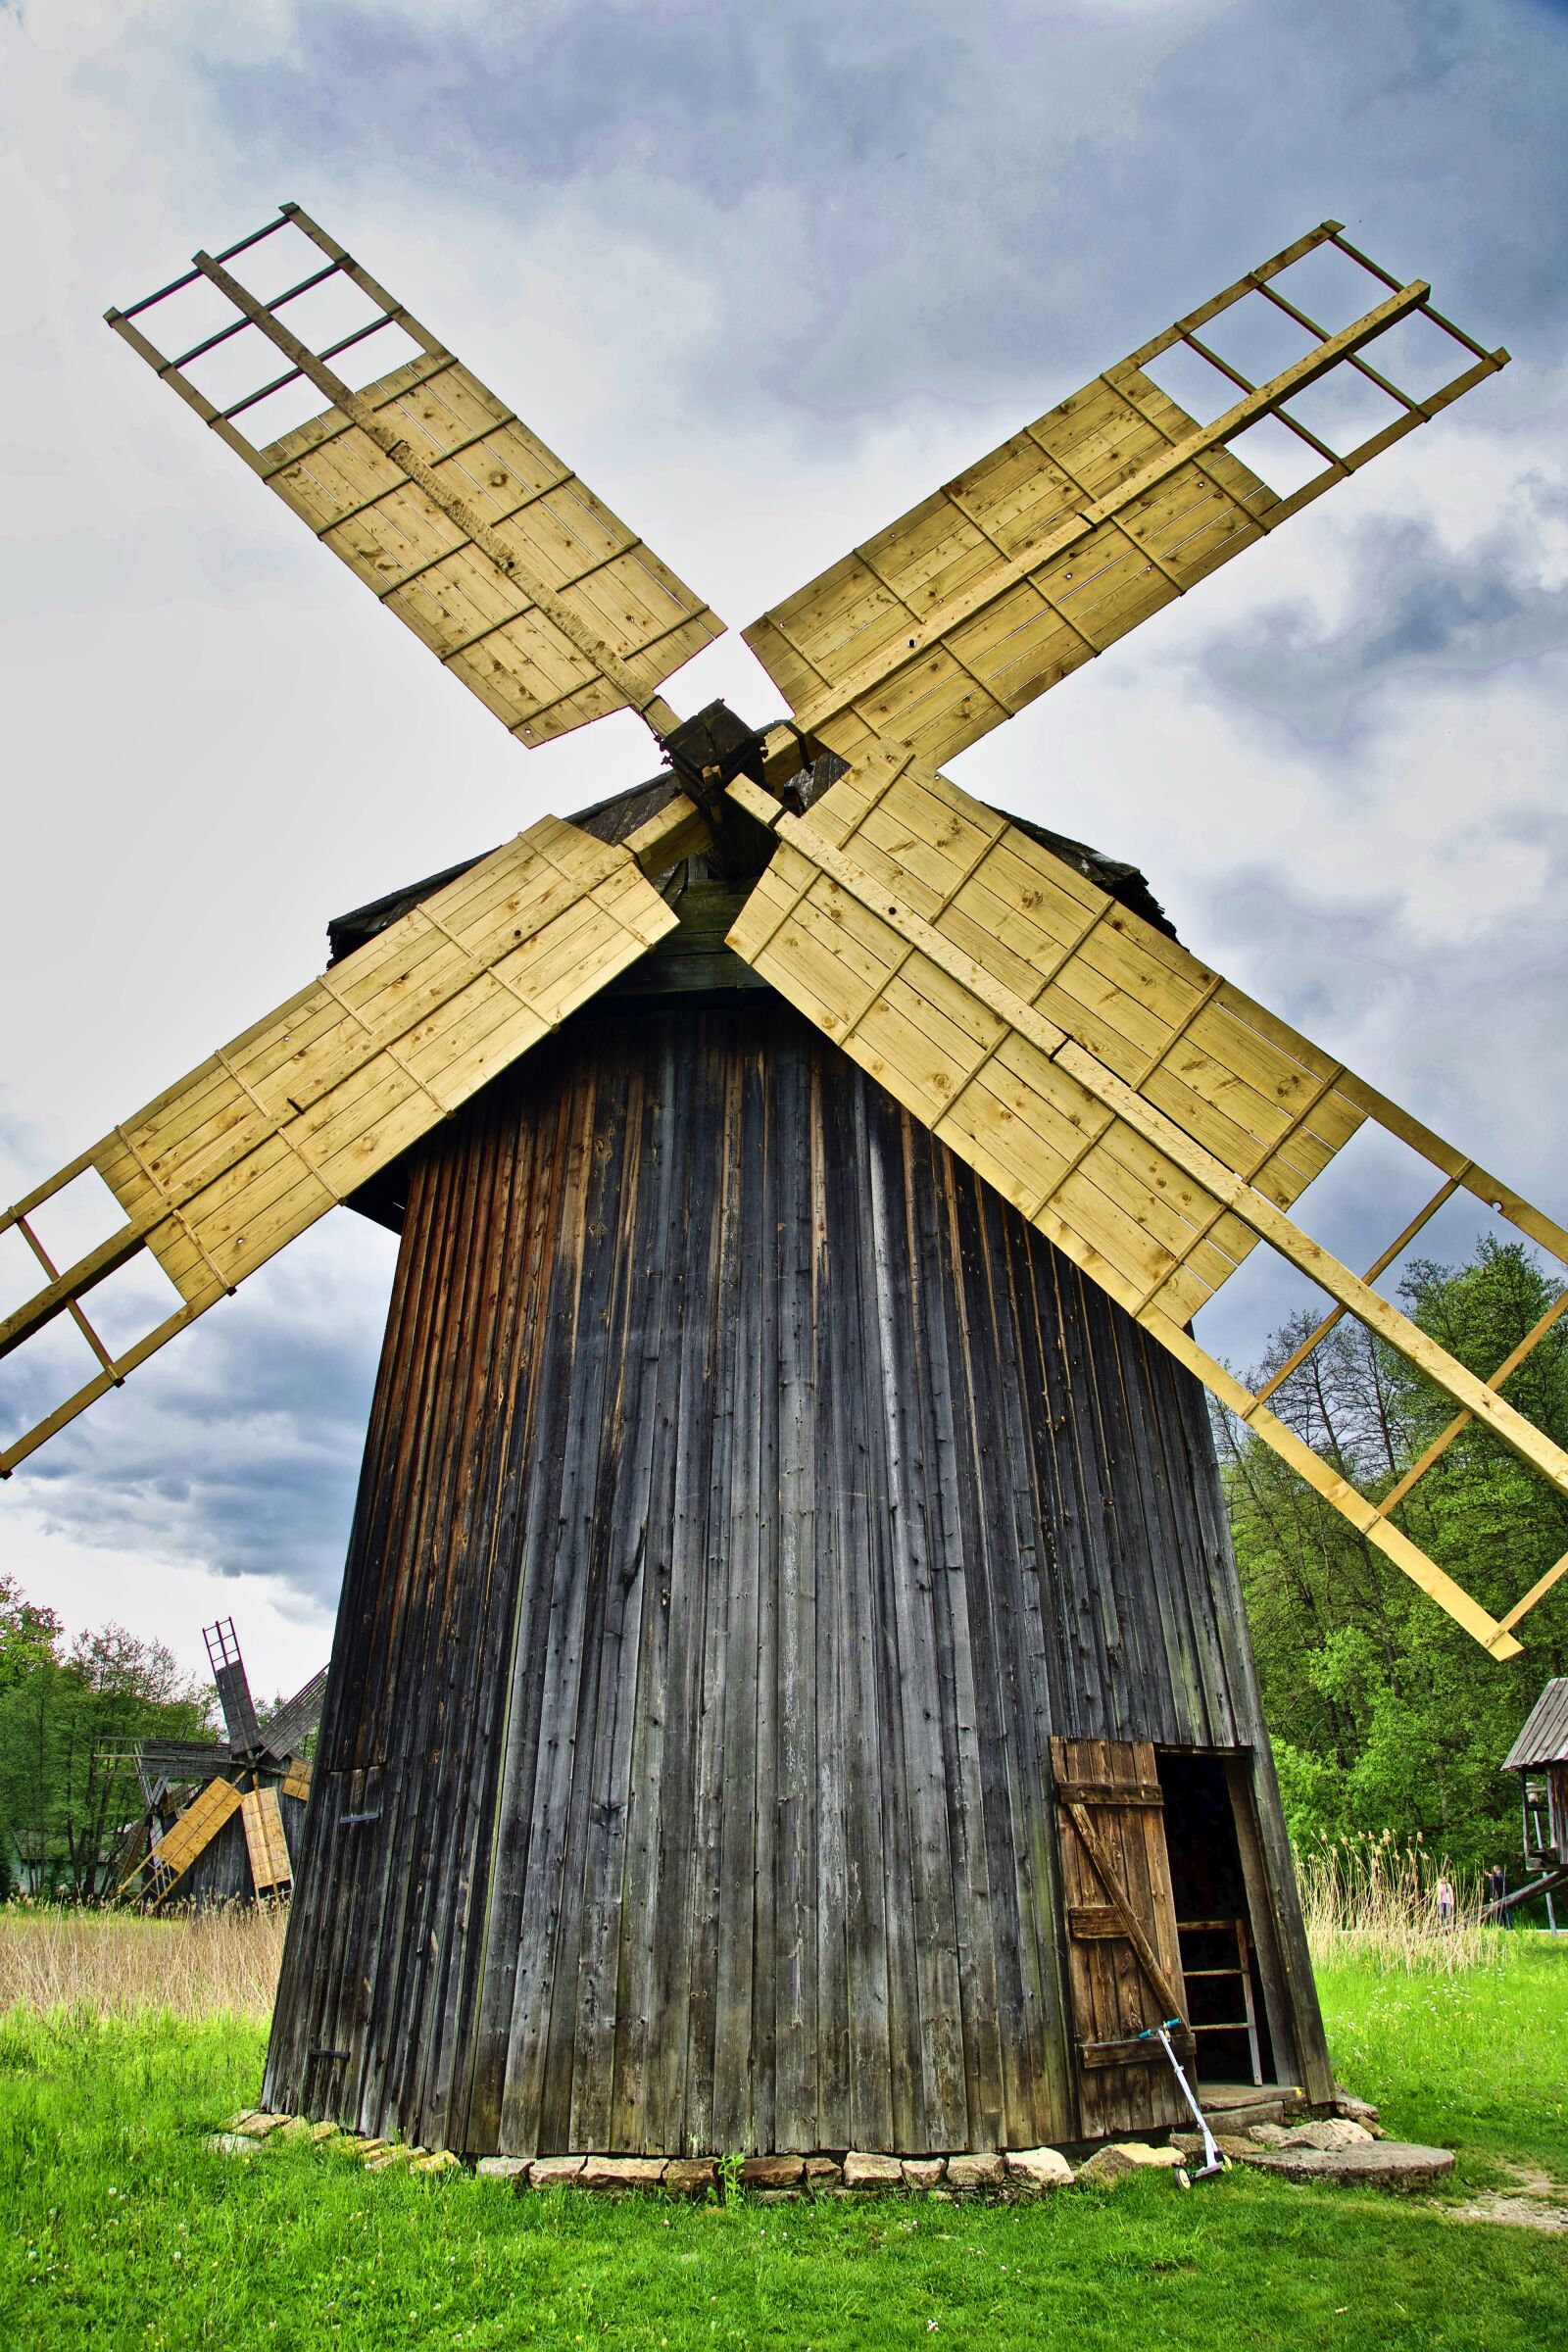 Sony a6500 sample photo. Windmill, traditional, wooden photography